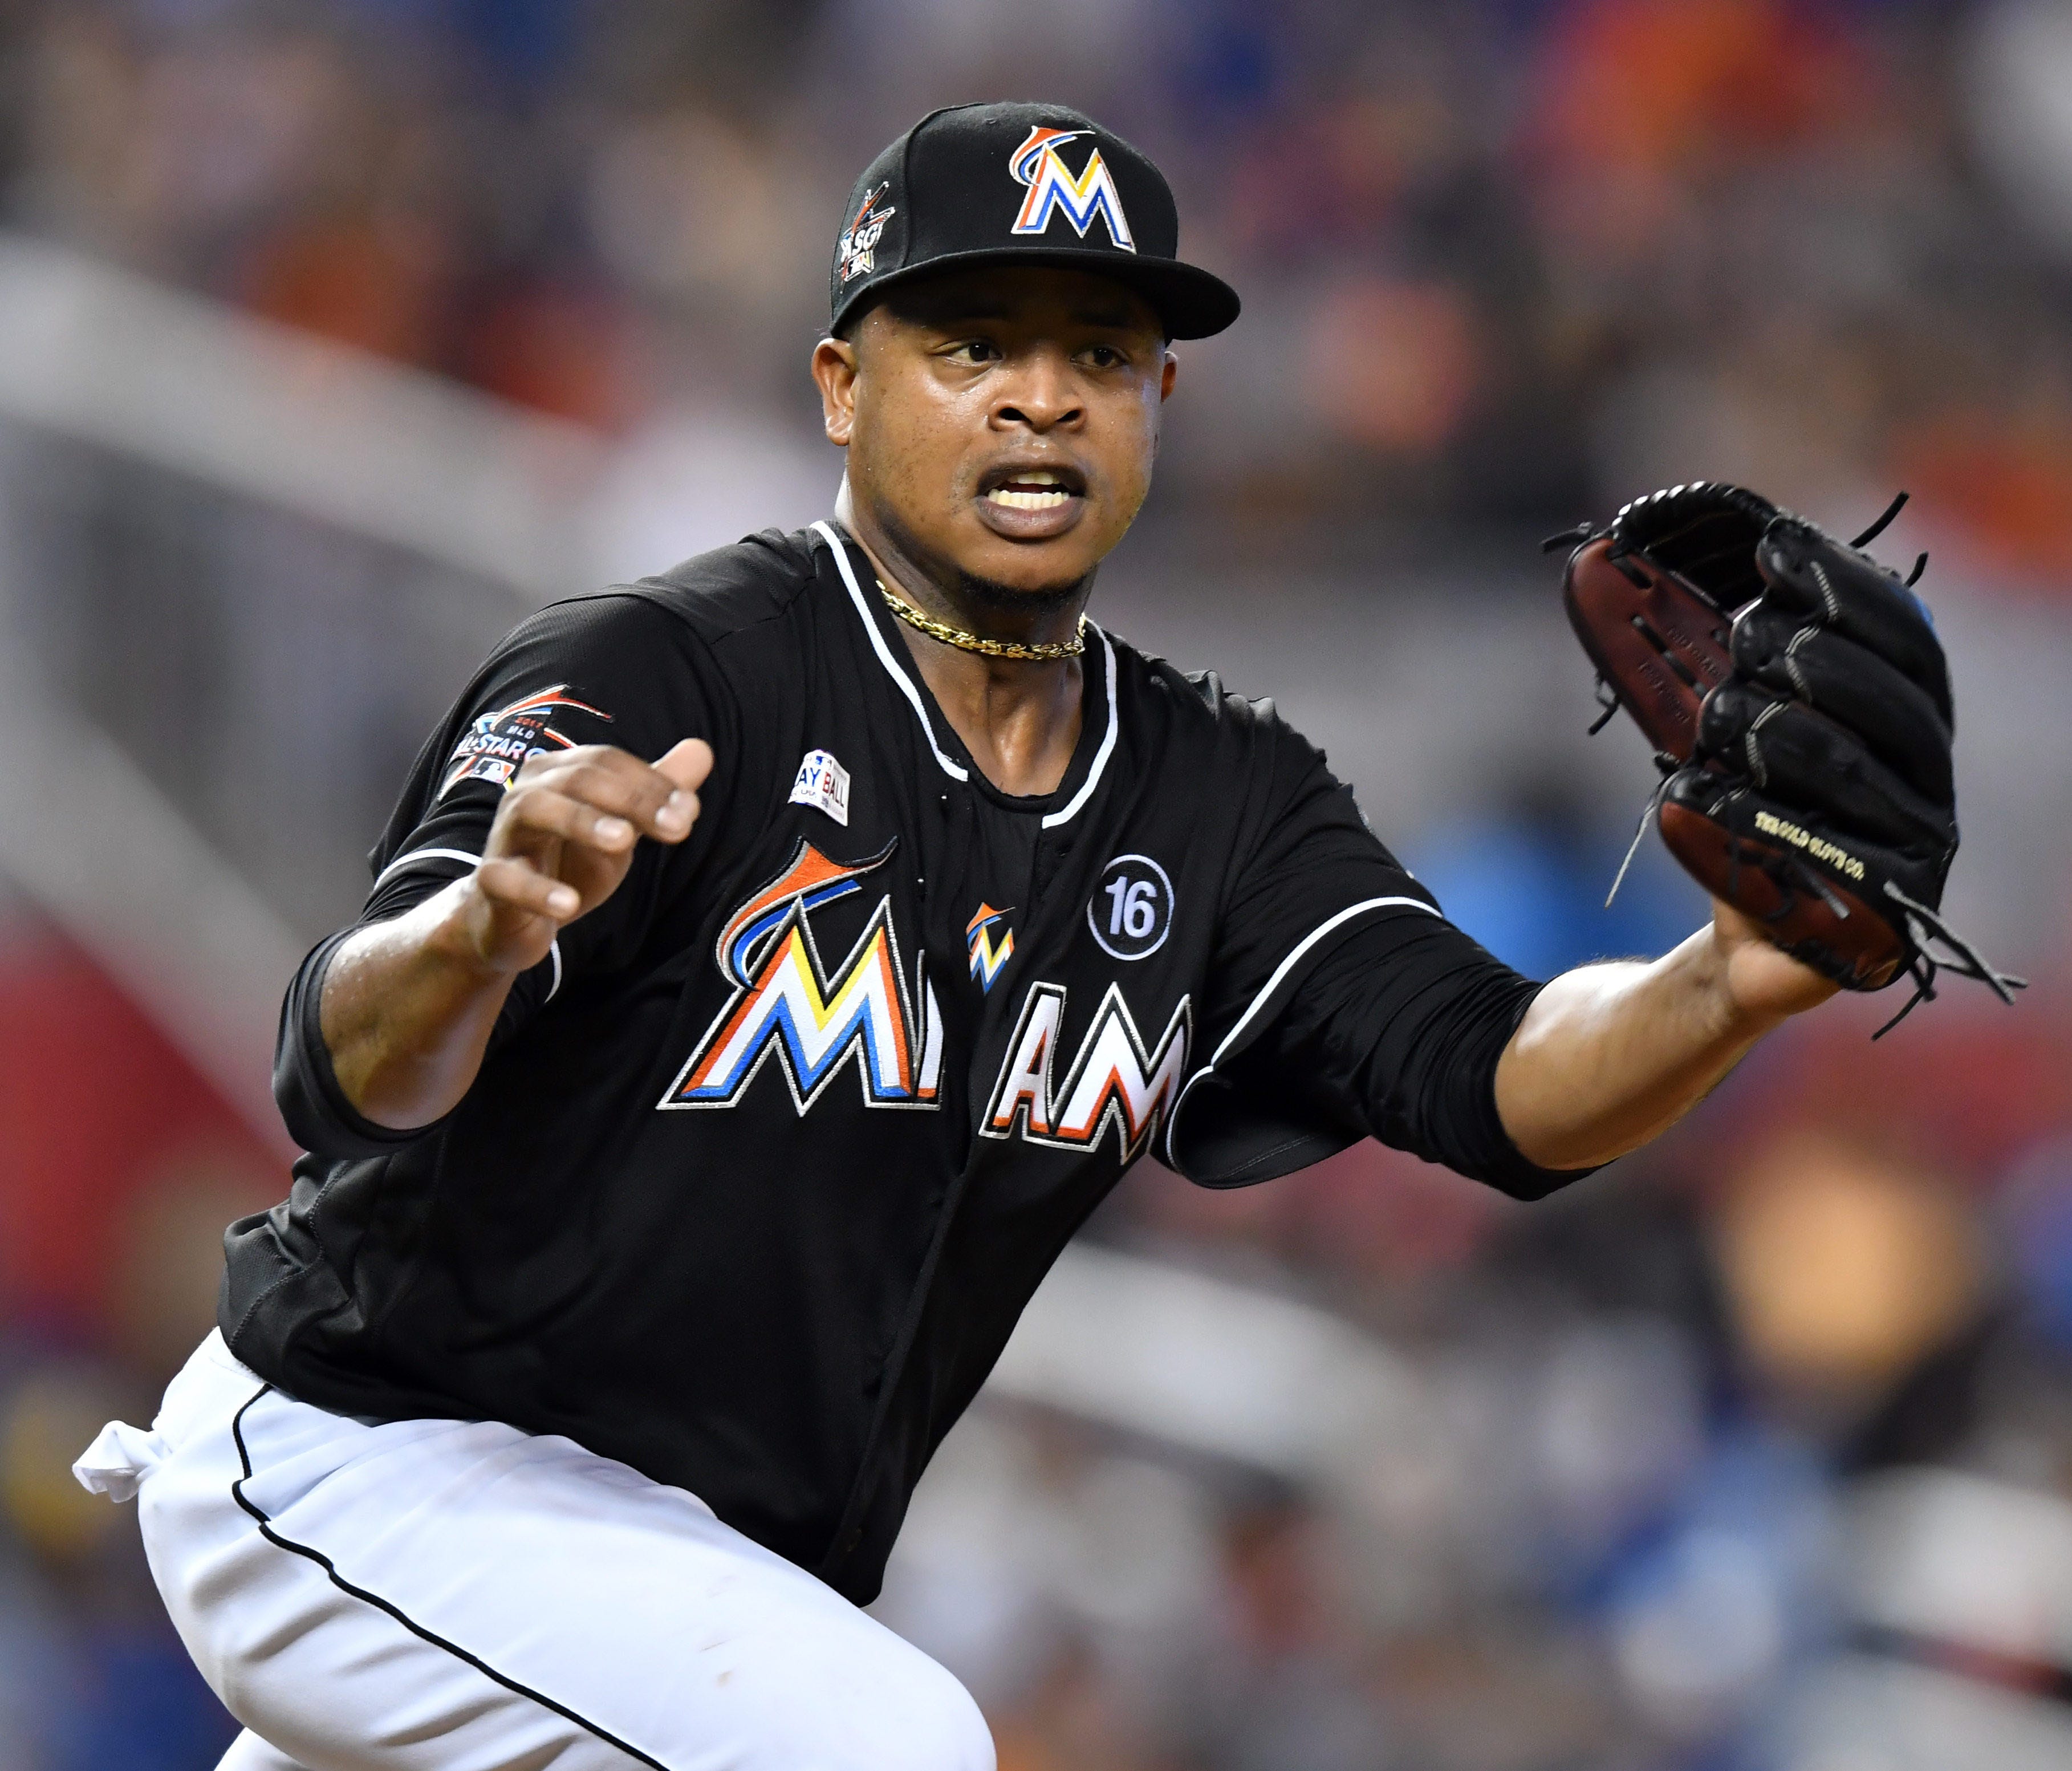 Edinson Volquez couldn't have honored Yordano Ventura any better than he did Saturday.